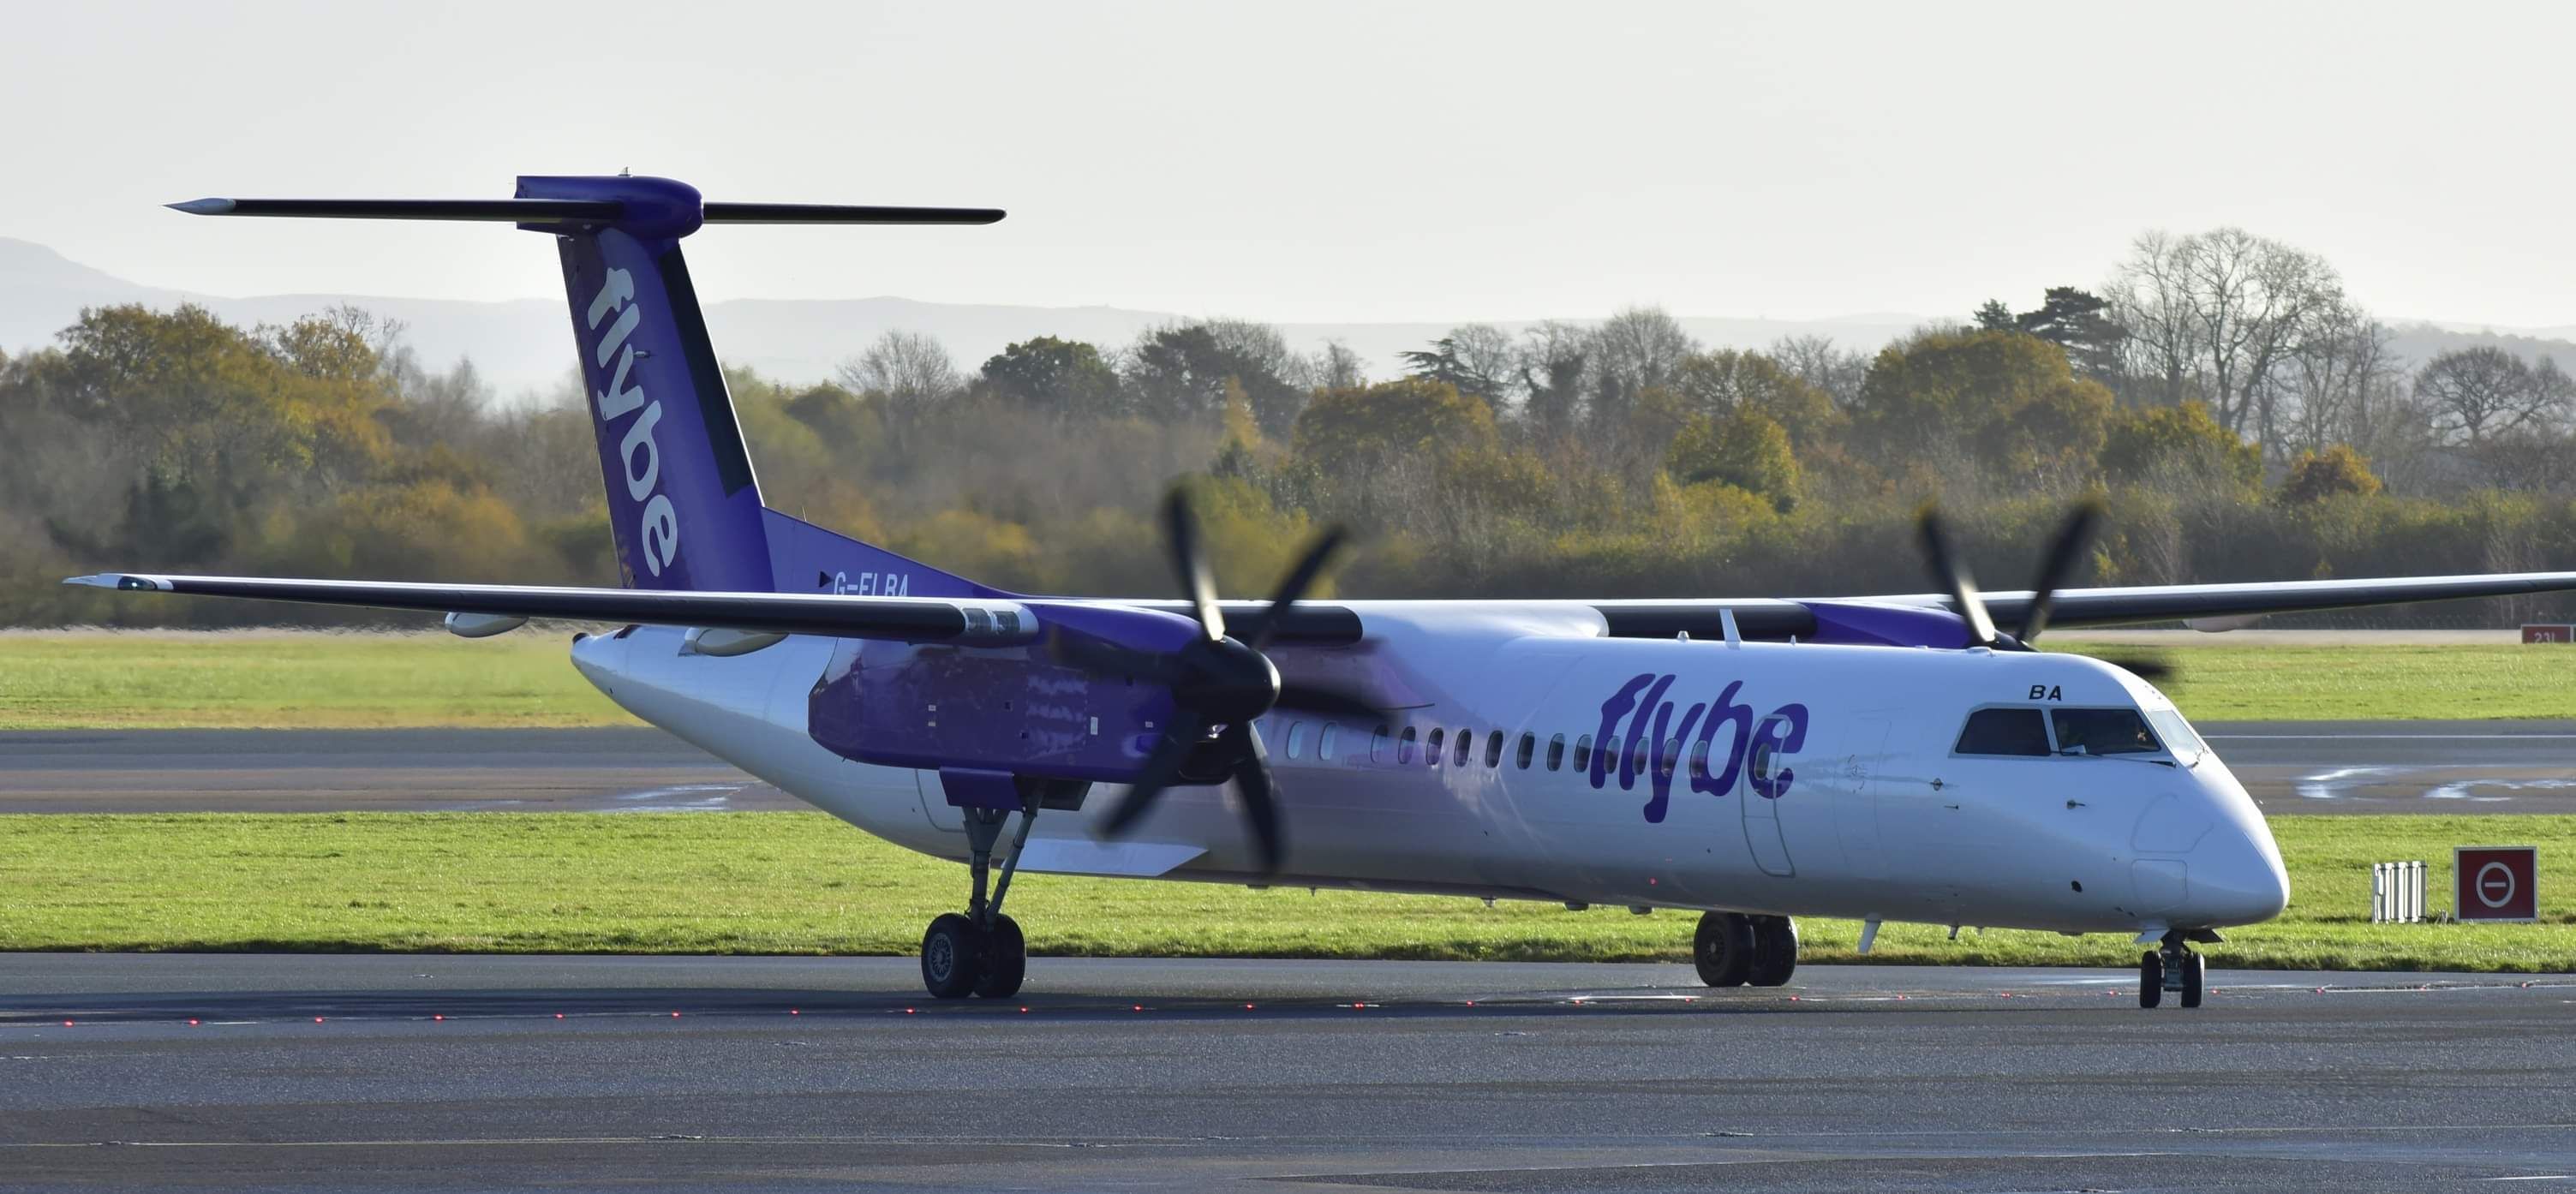 A Flybe Dash 8 on the taxiway